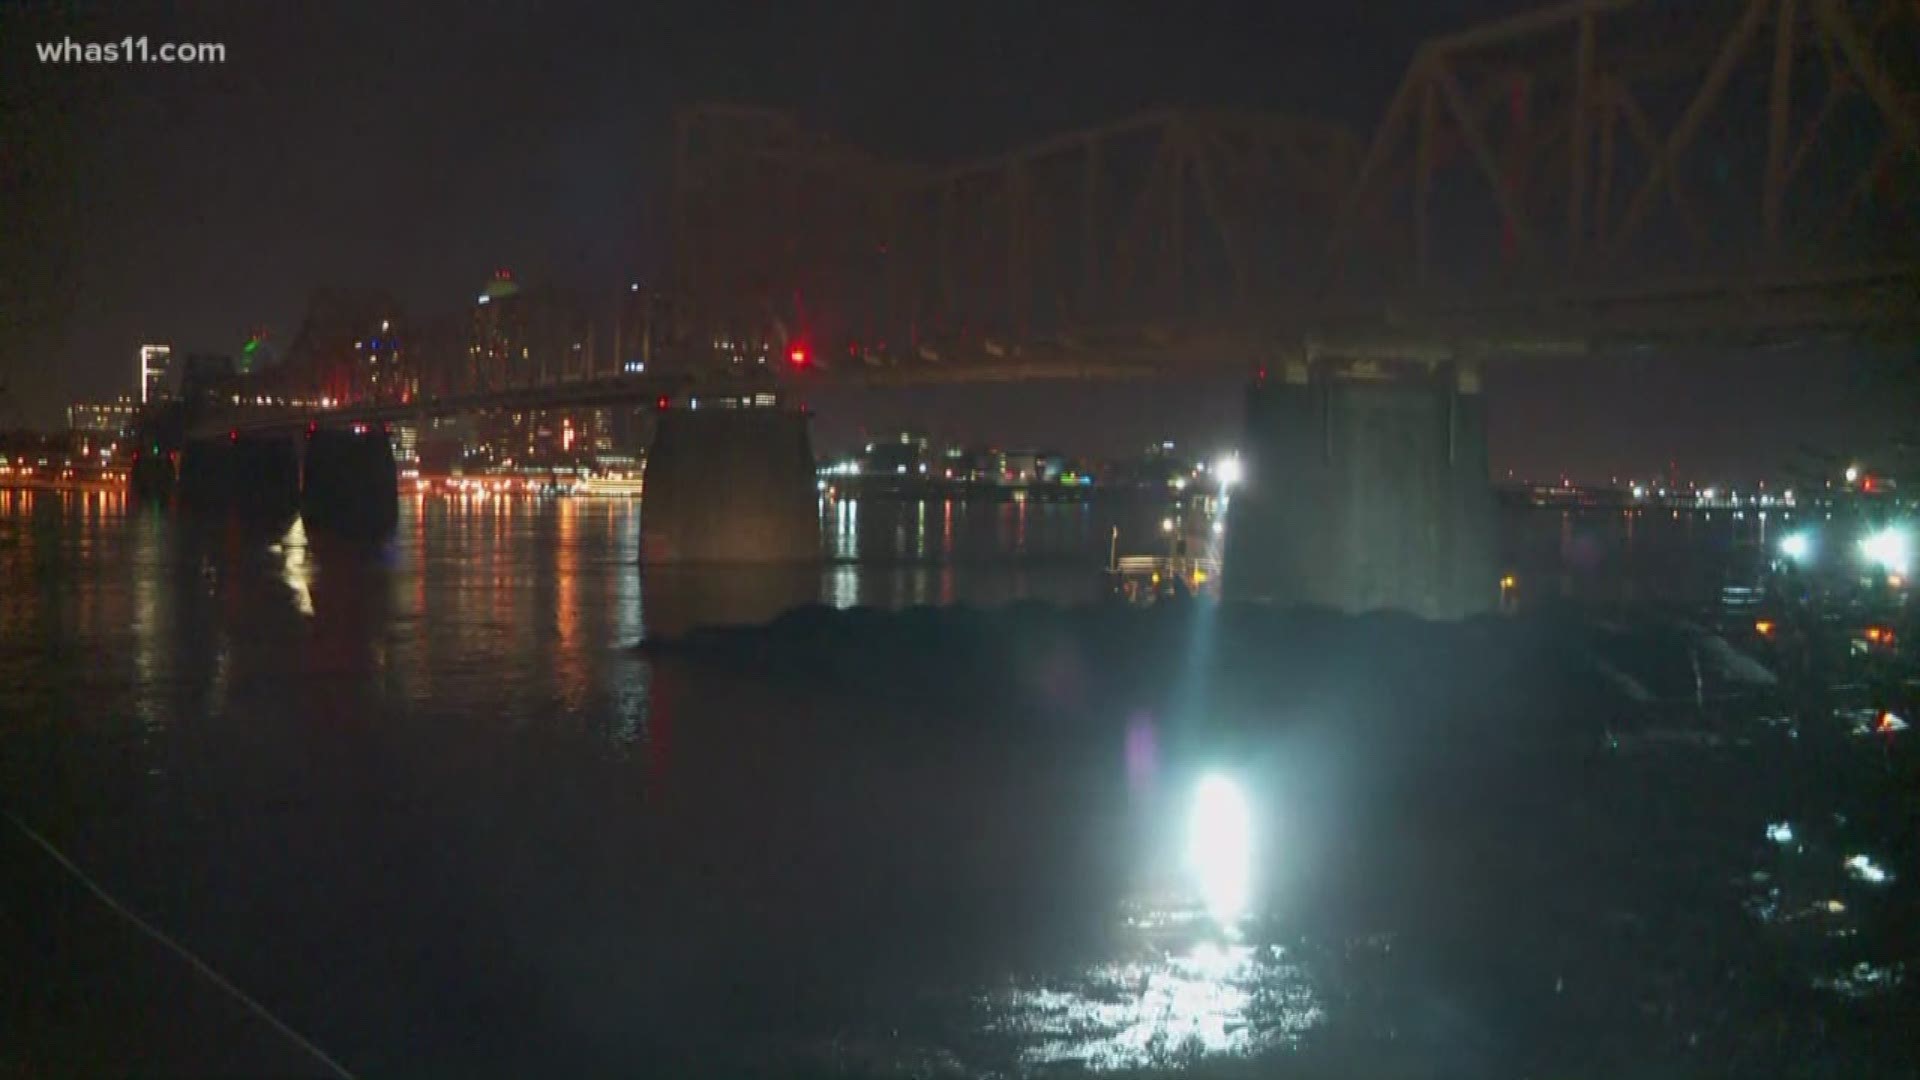 The Louisville Metro Police Department and Jeffersonville Police Department have shut down the bridge for the time being to inspect the bridge.